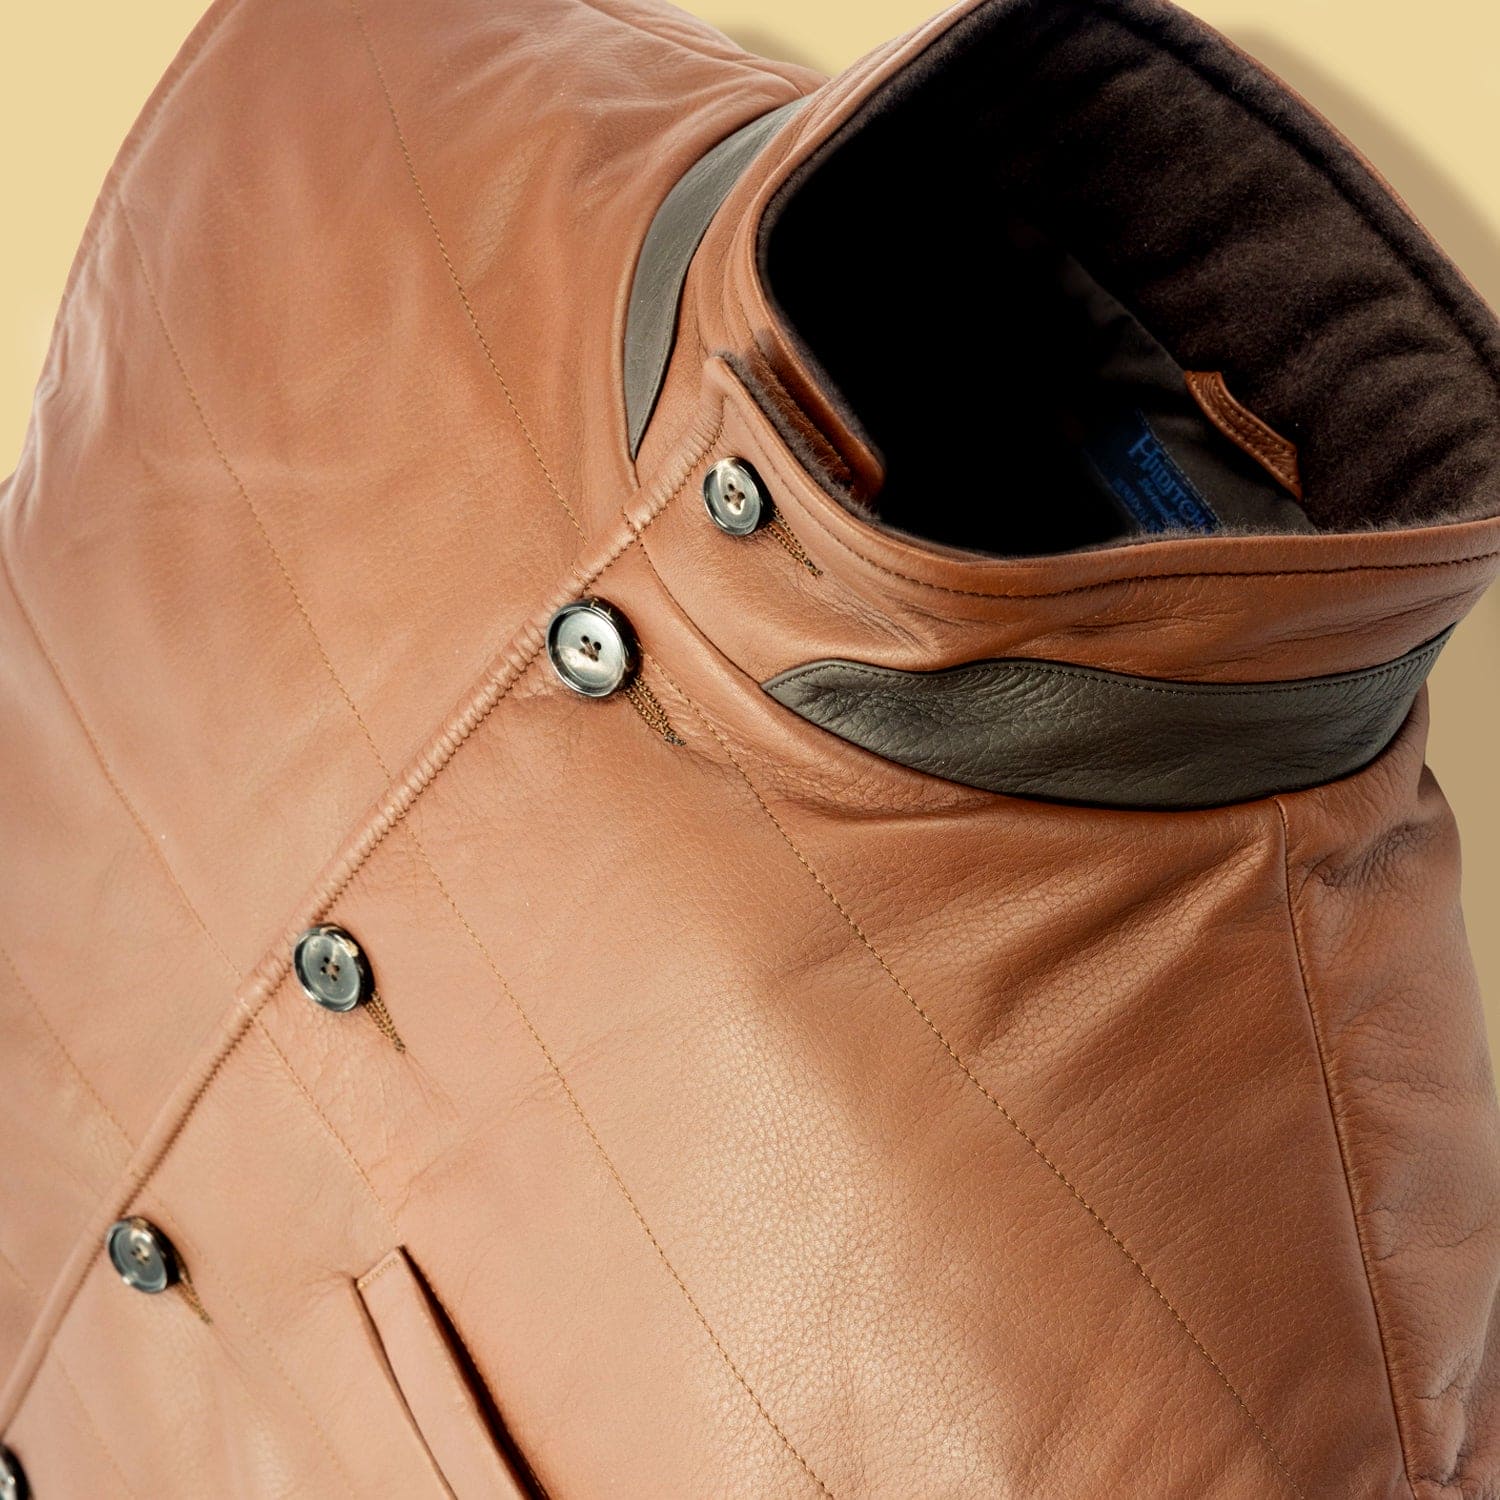 Terra Leather Button-Up Gilet